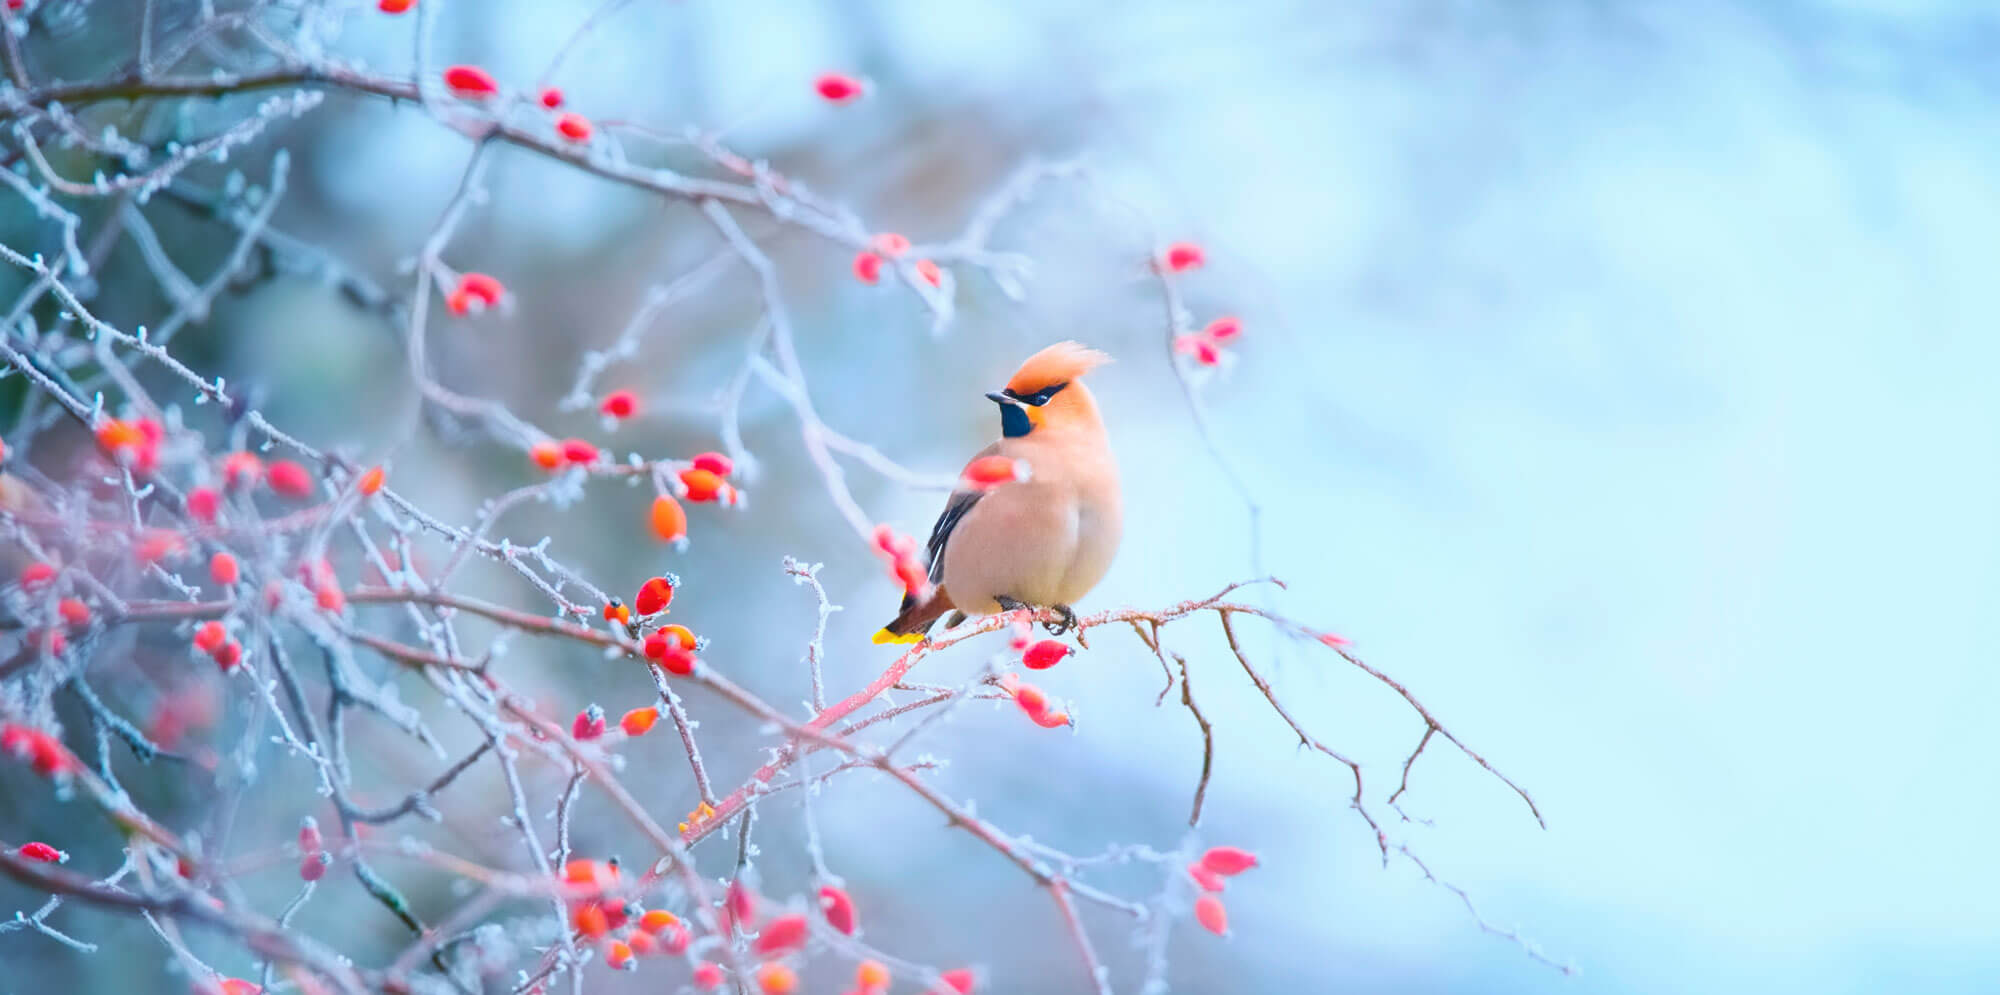 bird in frosty bush with red berries